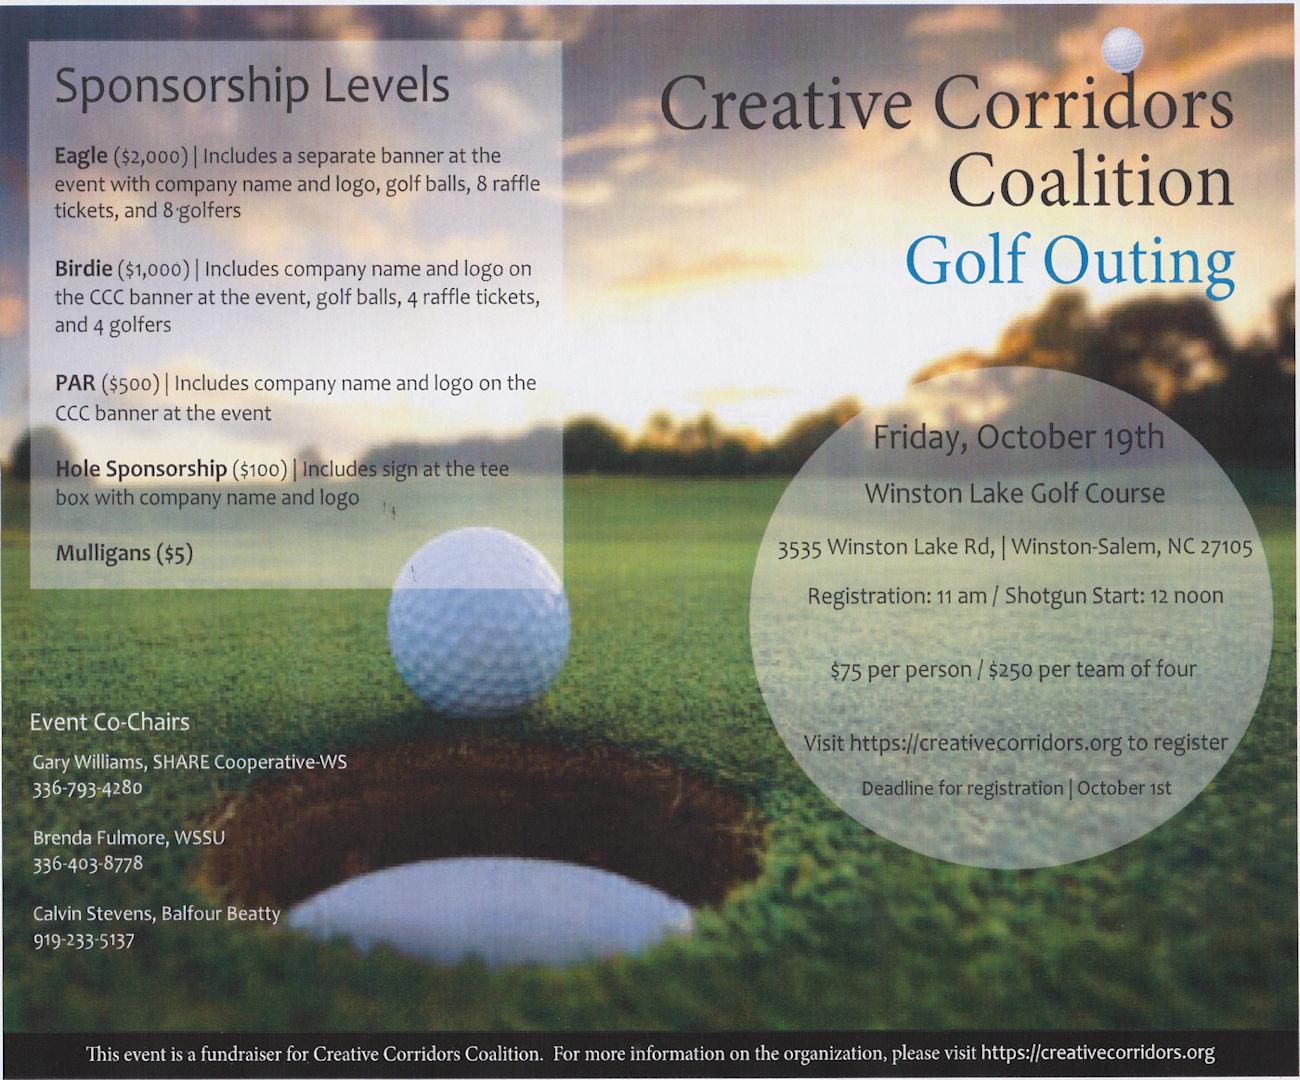 Creative Corridors Coalition - Golf Outing - Date Changed